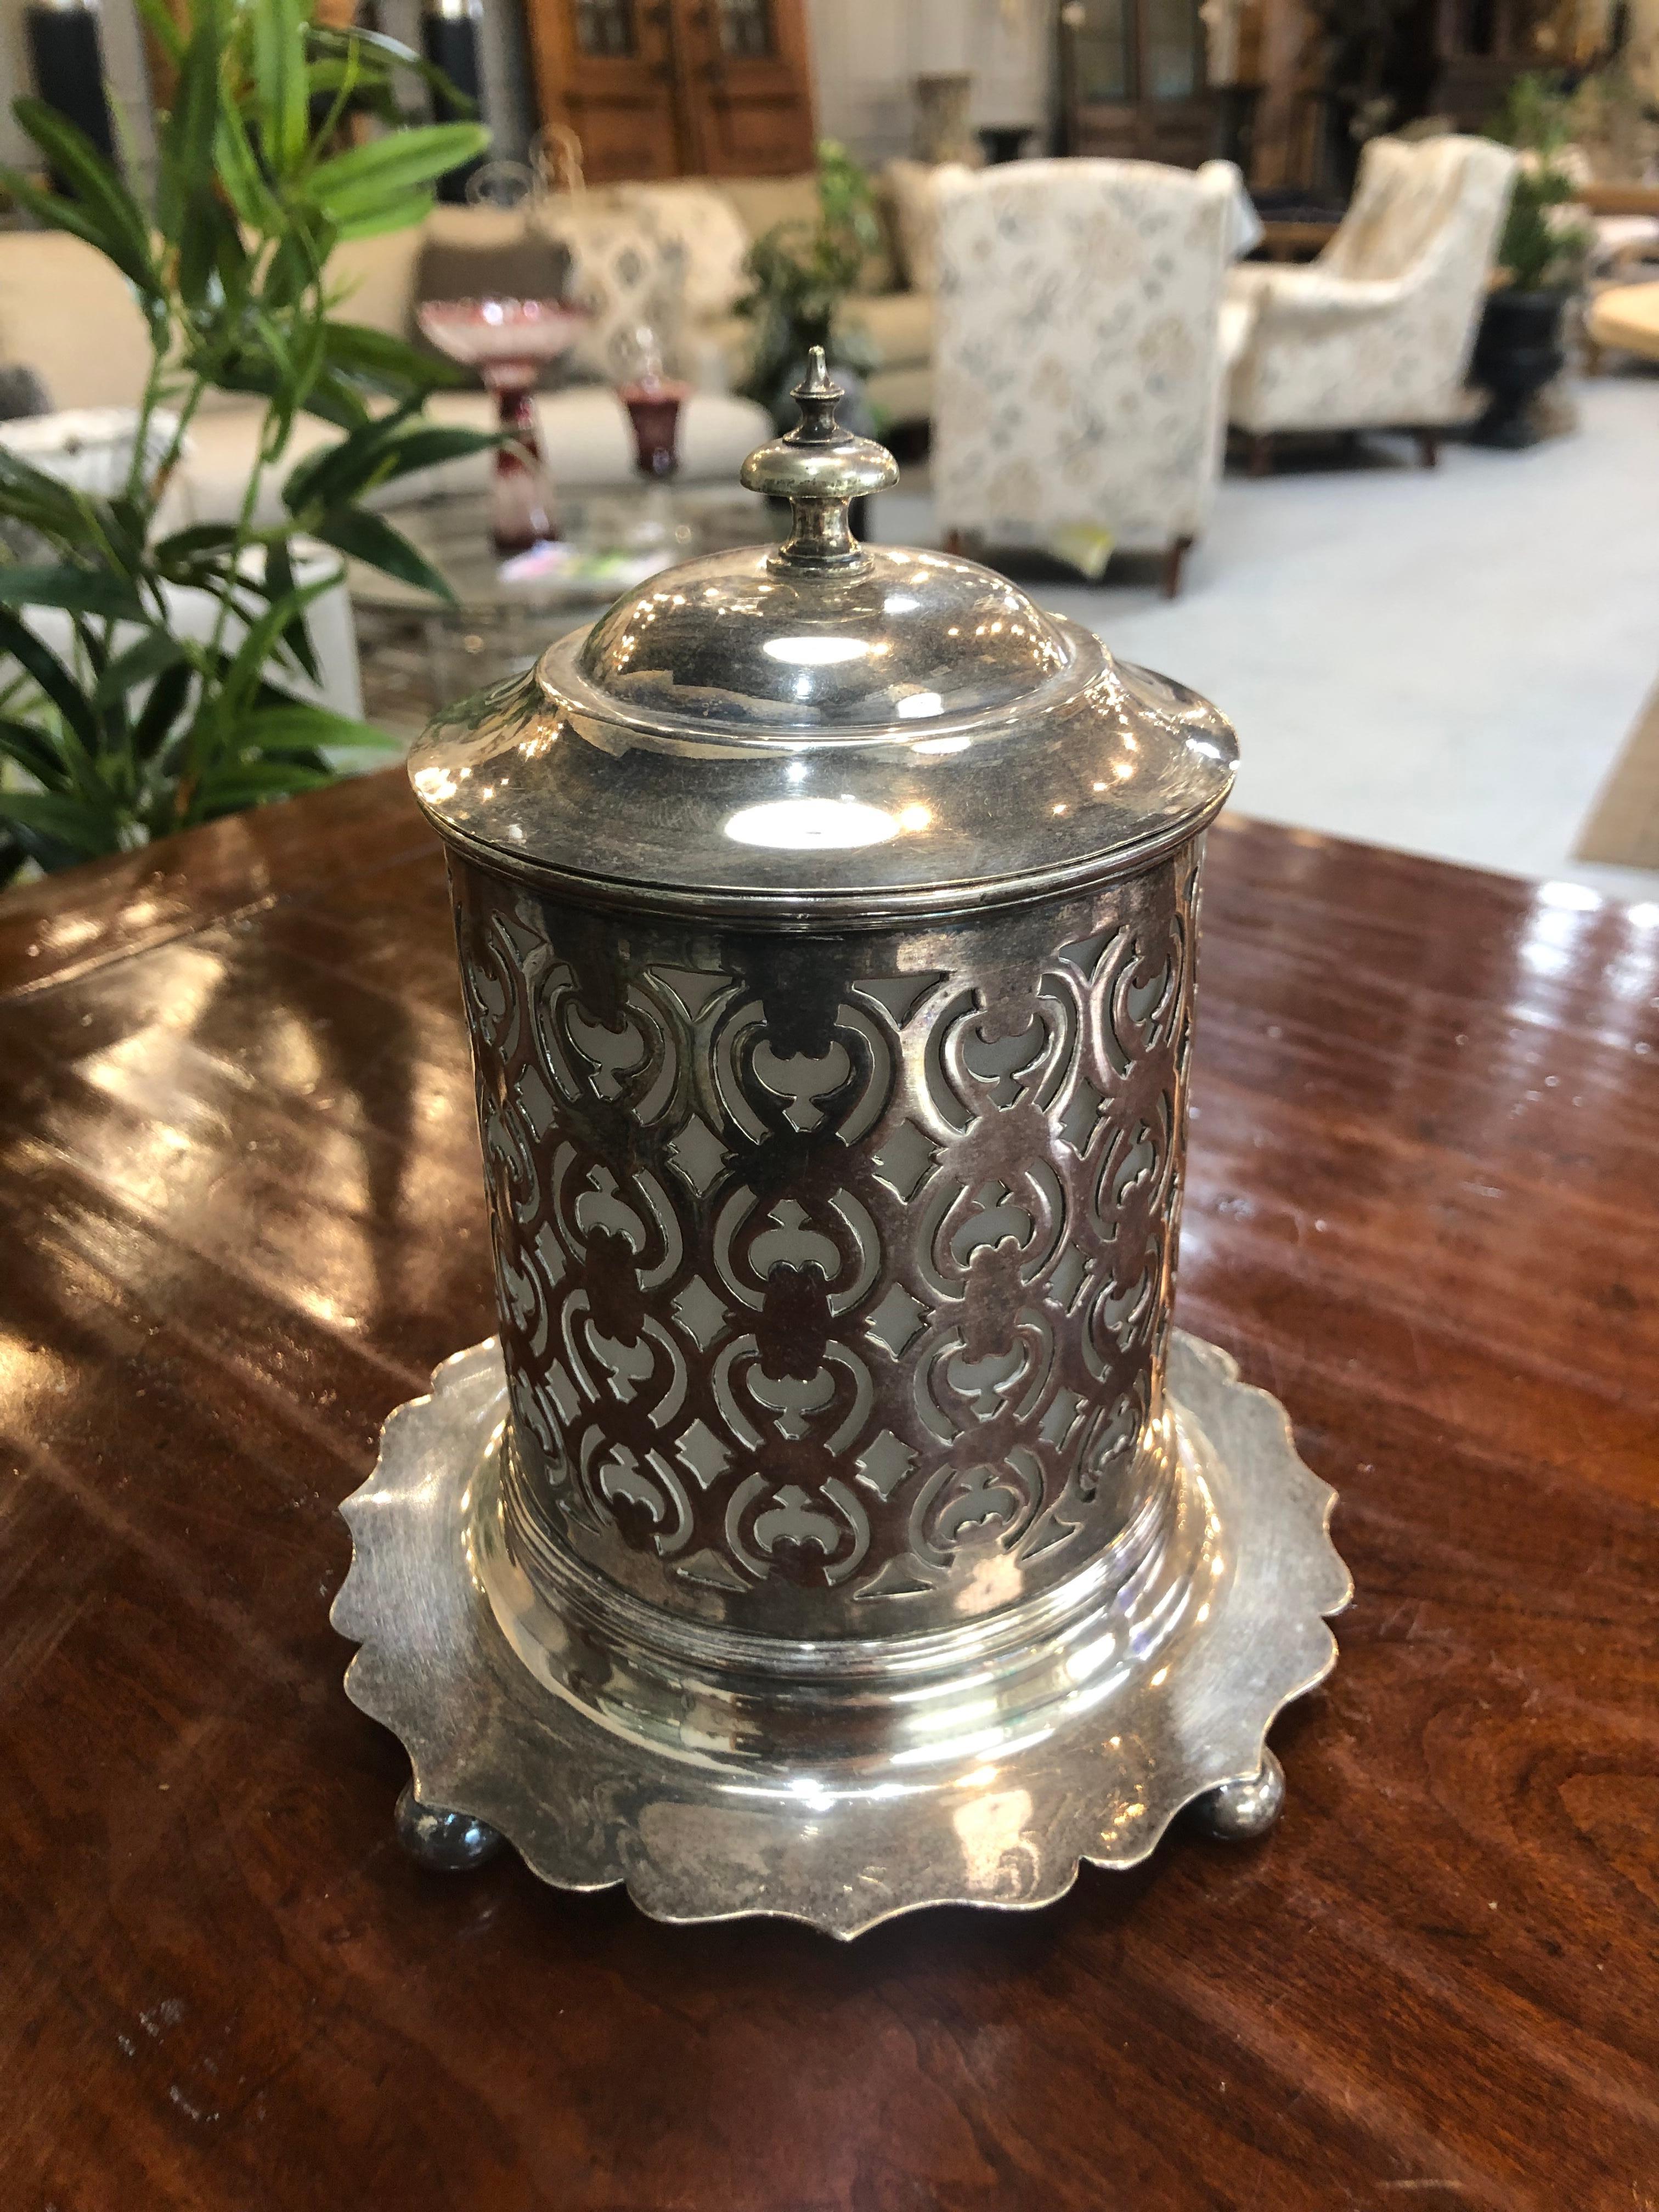 Late 19 century pierced silver plated jam pot with a frosted liner and bun feet circa 1880 England. This is a wonderful piece from a private collector but I do not believe the frosted liner is original to the piece but it does fit well.